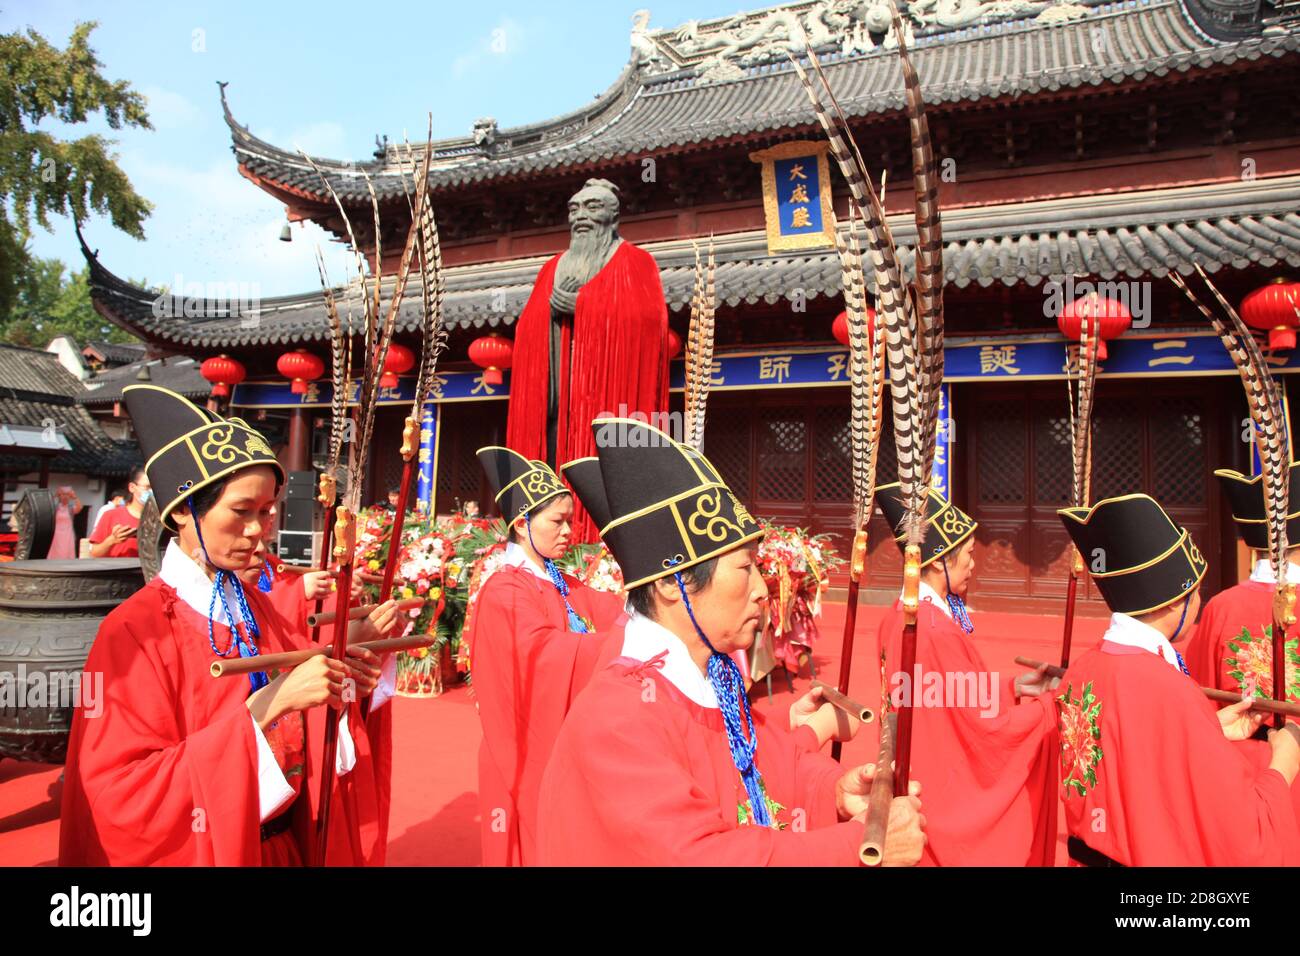 Descendants of Confucius, a Chinese philosopher and politician of the ...